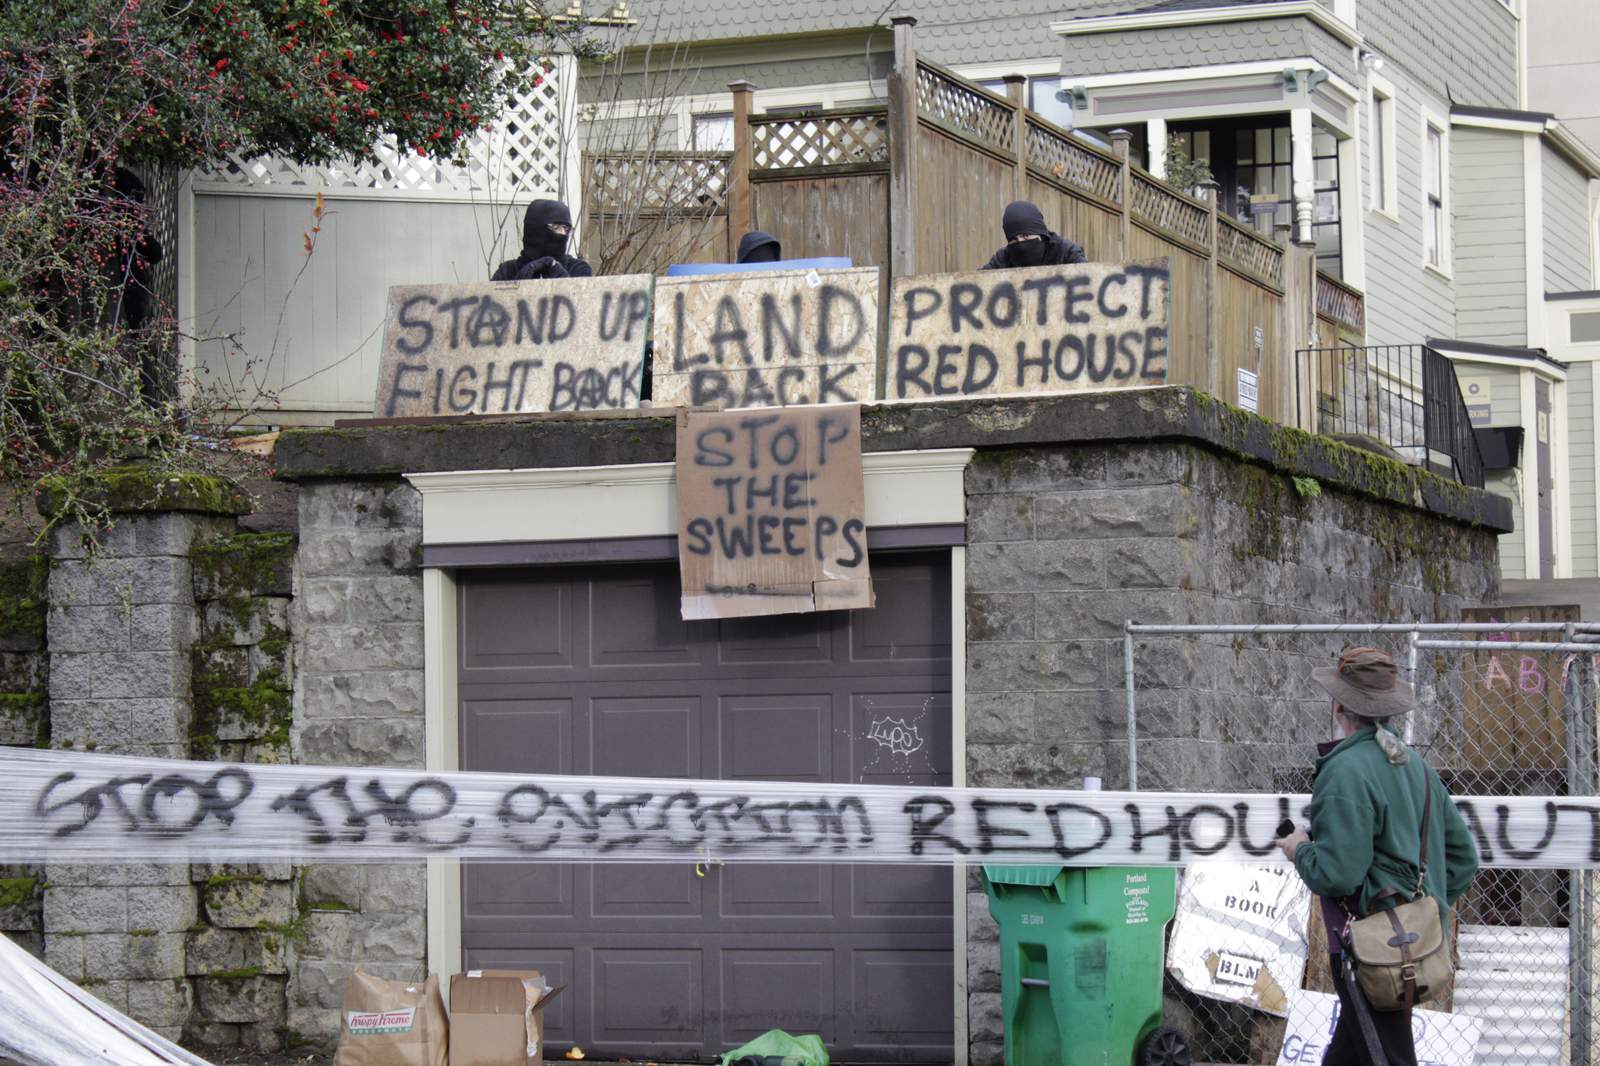 Portland police ask for clear streets at barricaded house